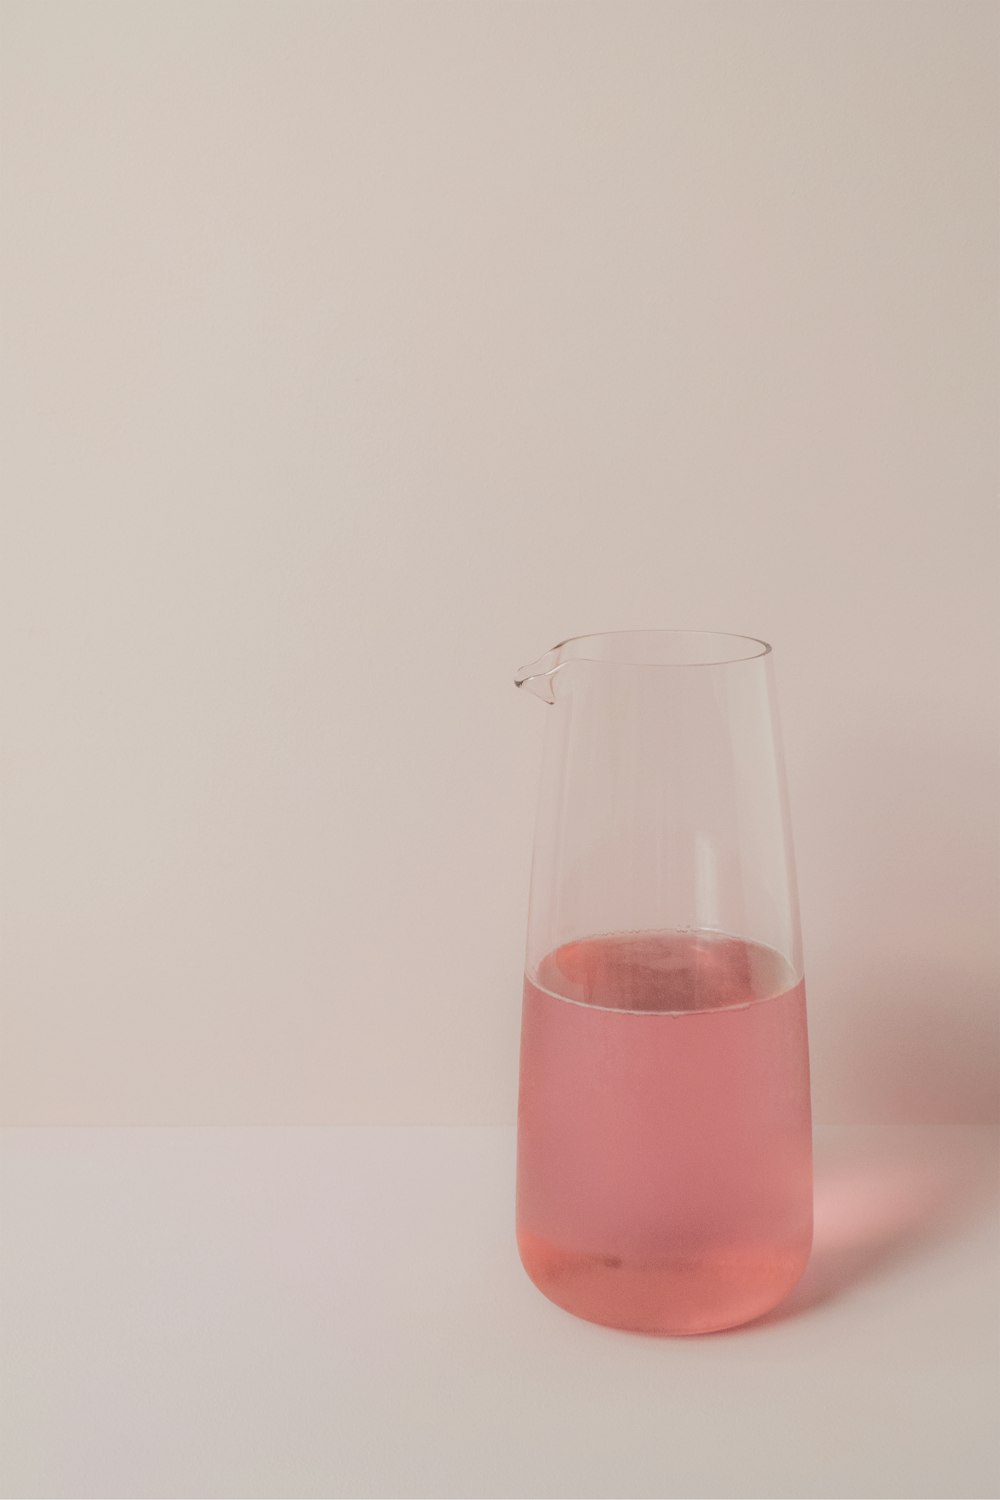 a pink liquid is in a glass vase